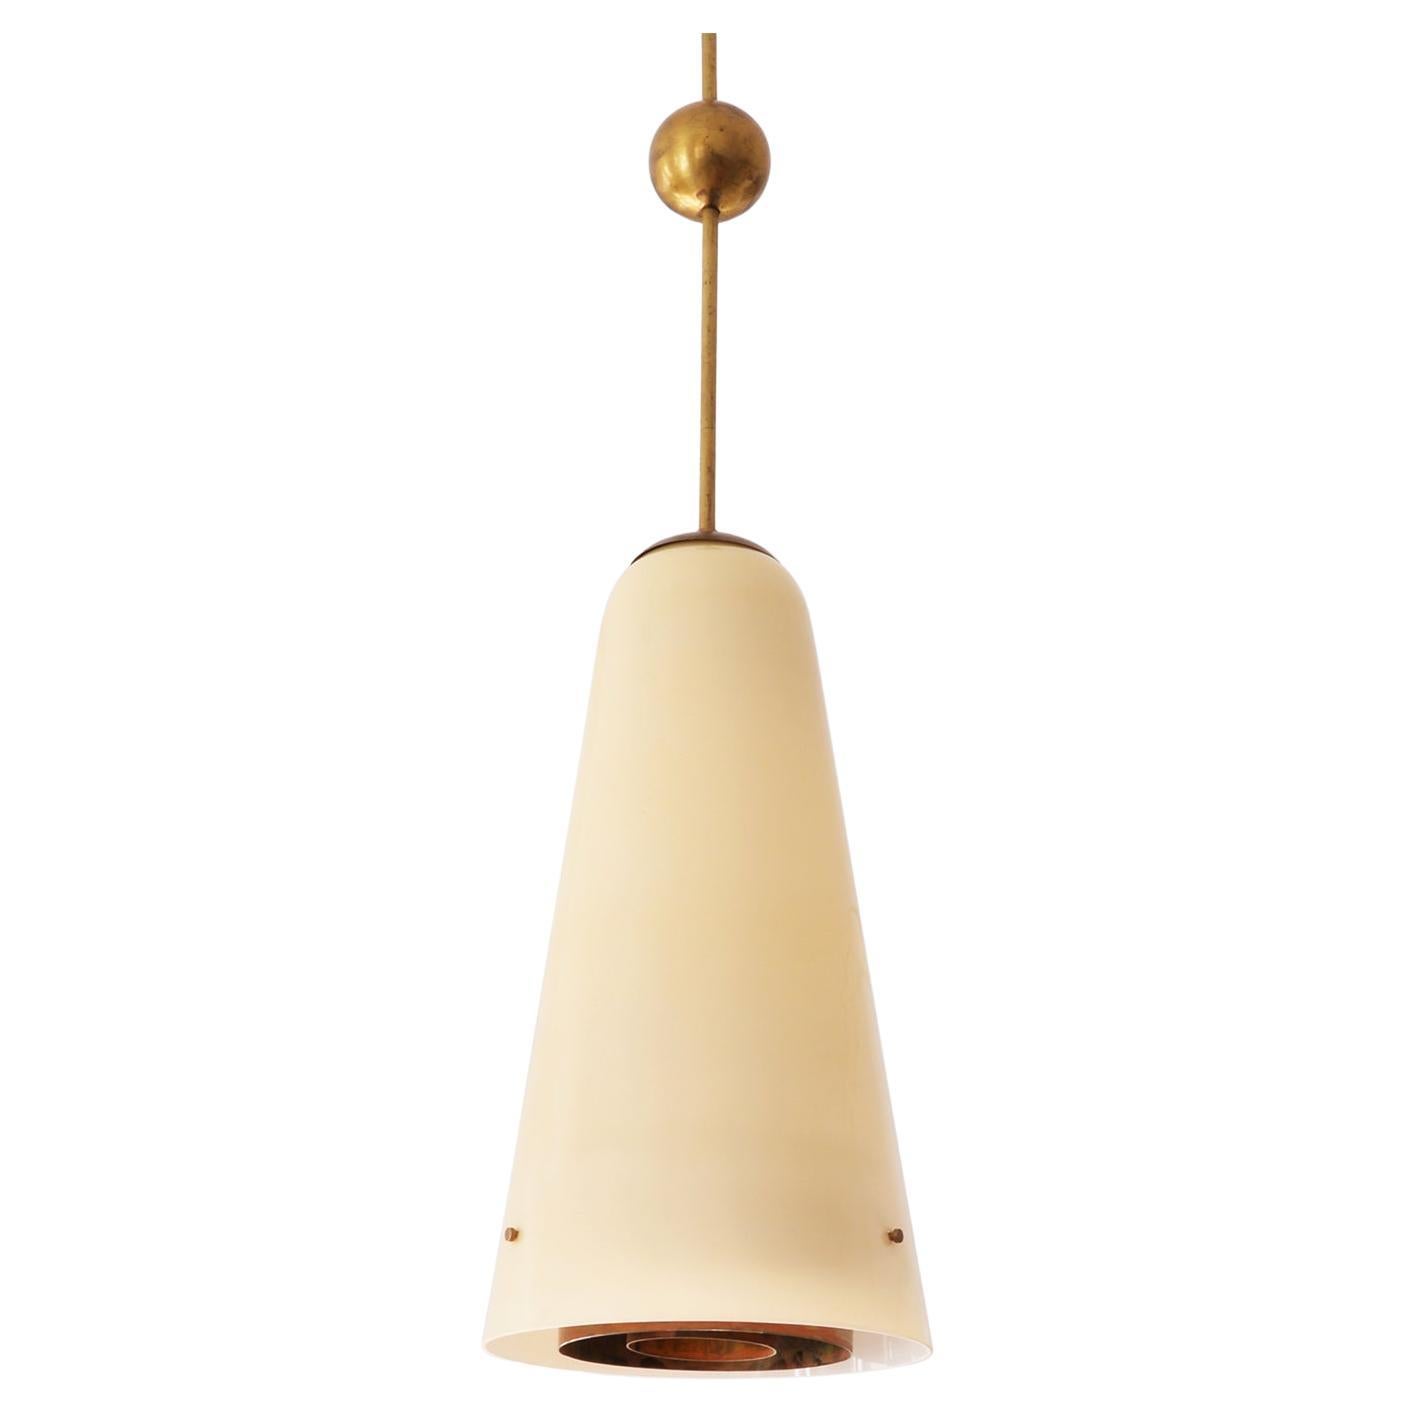 Ceiling Light by Paavo Tynell Manufactured by Taito Oy, Finland c. 1950 For Sale